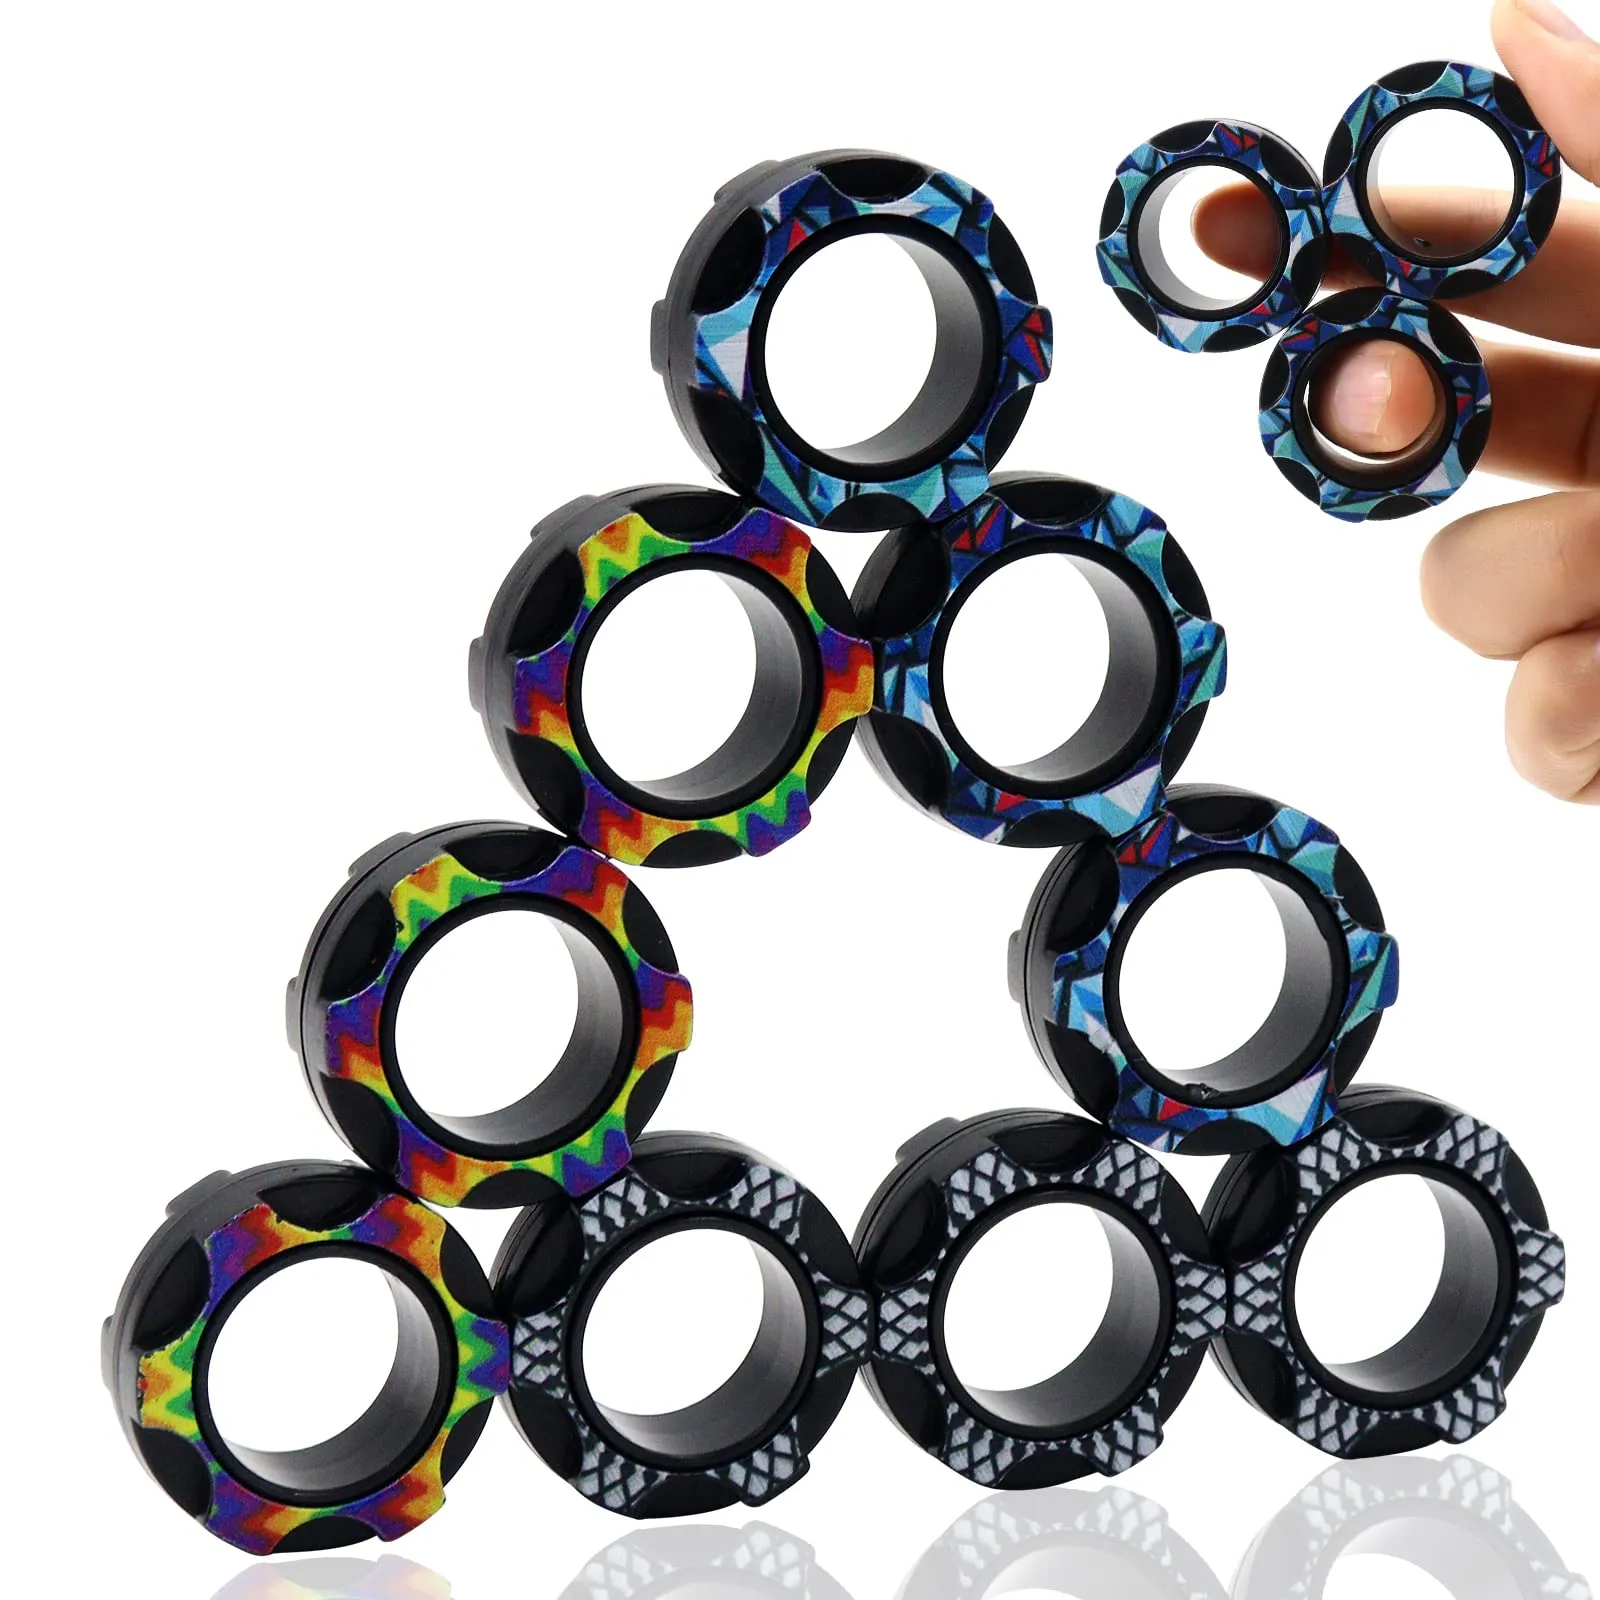 magnetic rings fidget toys pack idea adhd fidget toys adult fidget spinner rings for anxiety relief therapy great gift for adults teens kids 12 14 years old 